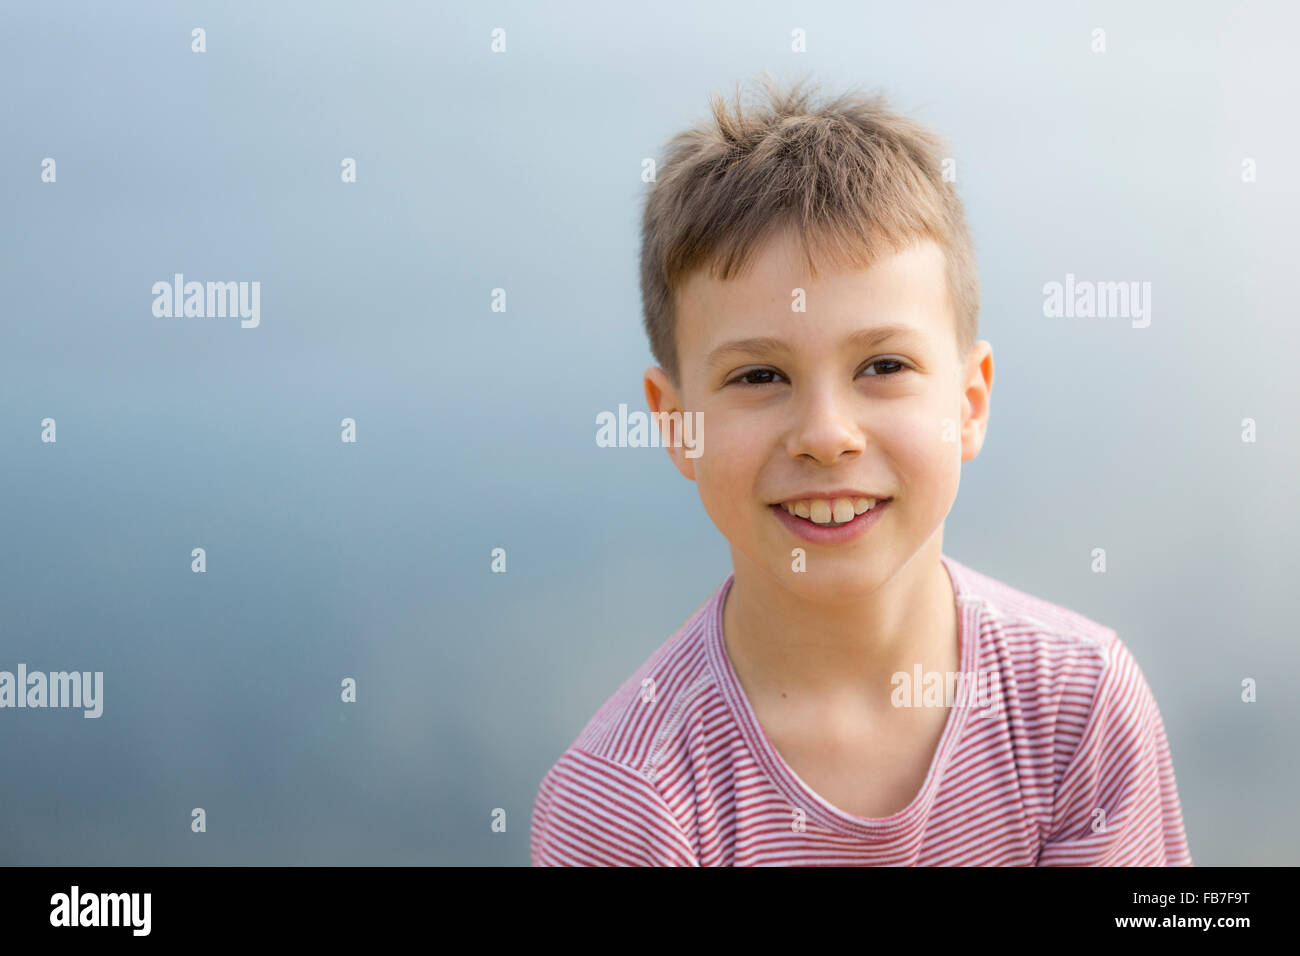 Thoughtful boy smiling while looking away outdoors Stock Photo